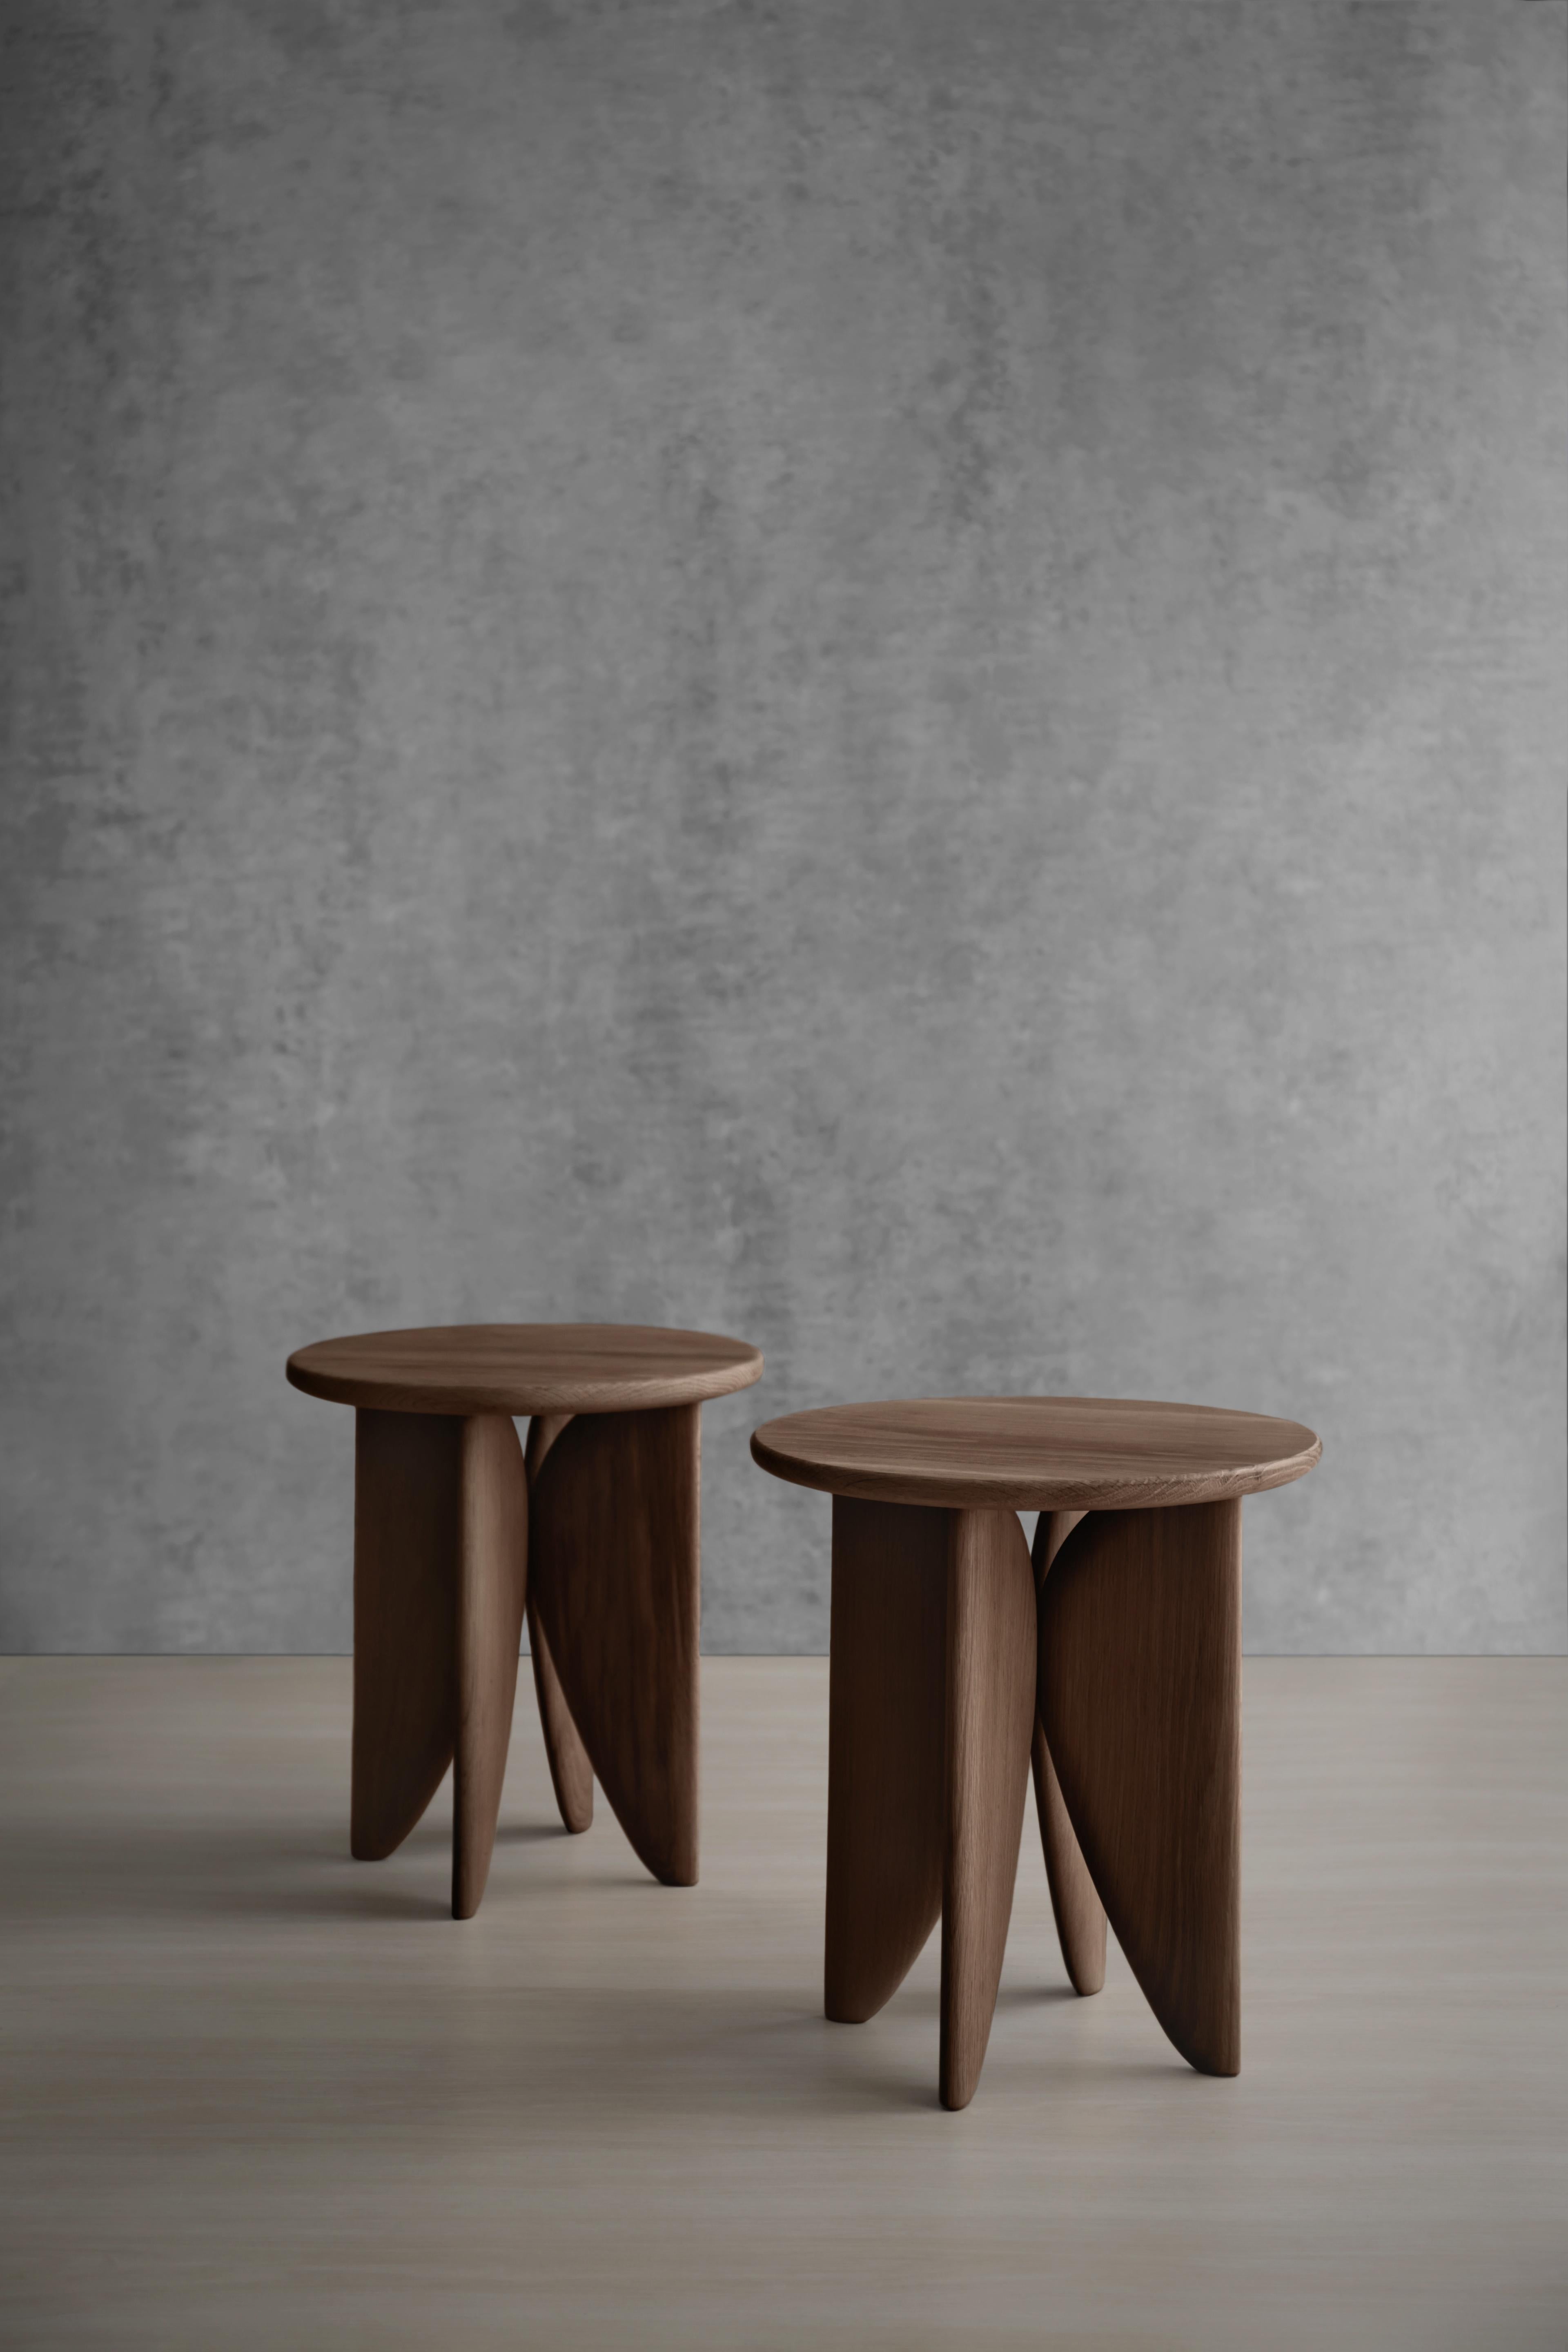 Noviembre V Stool, Side Table inspired in Burned Oak Wood by Joel Escalona

The Noviembre collection is inspired by the creative values of Constantin Brancusi, a Romanian sculptor considered one of the most influential artists of the twentieth